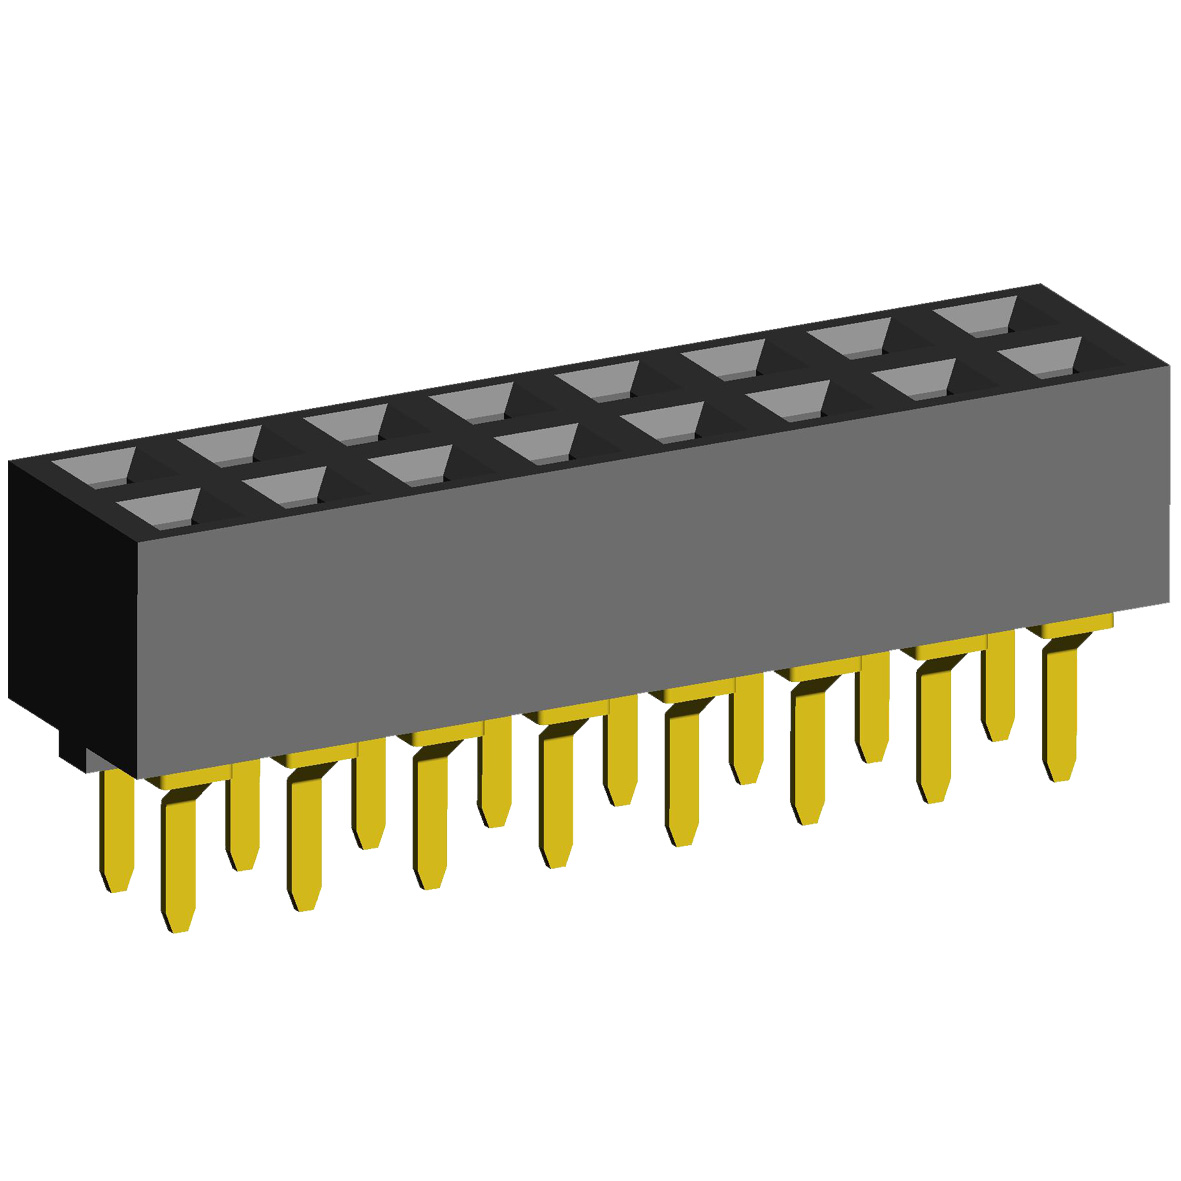 Open pin headers and Sockets for its, PCB/PCB (Board-to-Board) types with pitch 2,54x2,54 Pitch between pins in one row and sockets for them